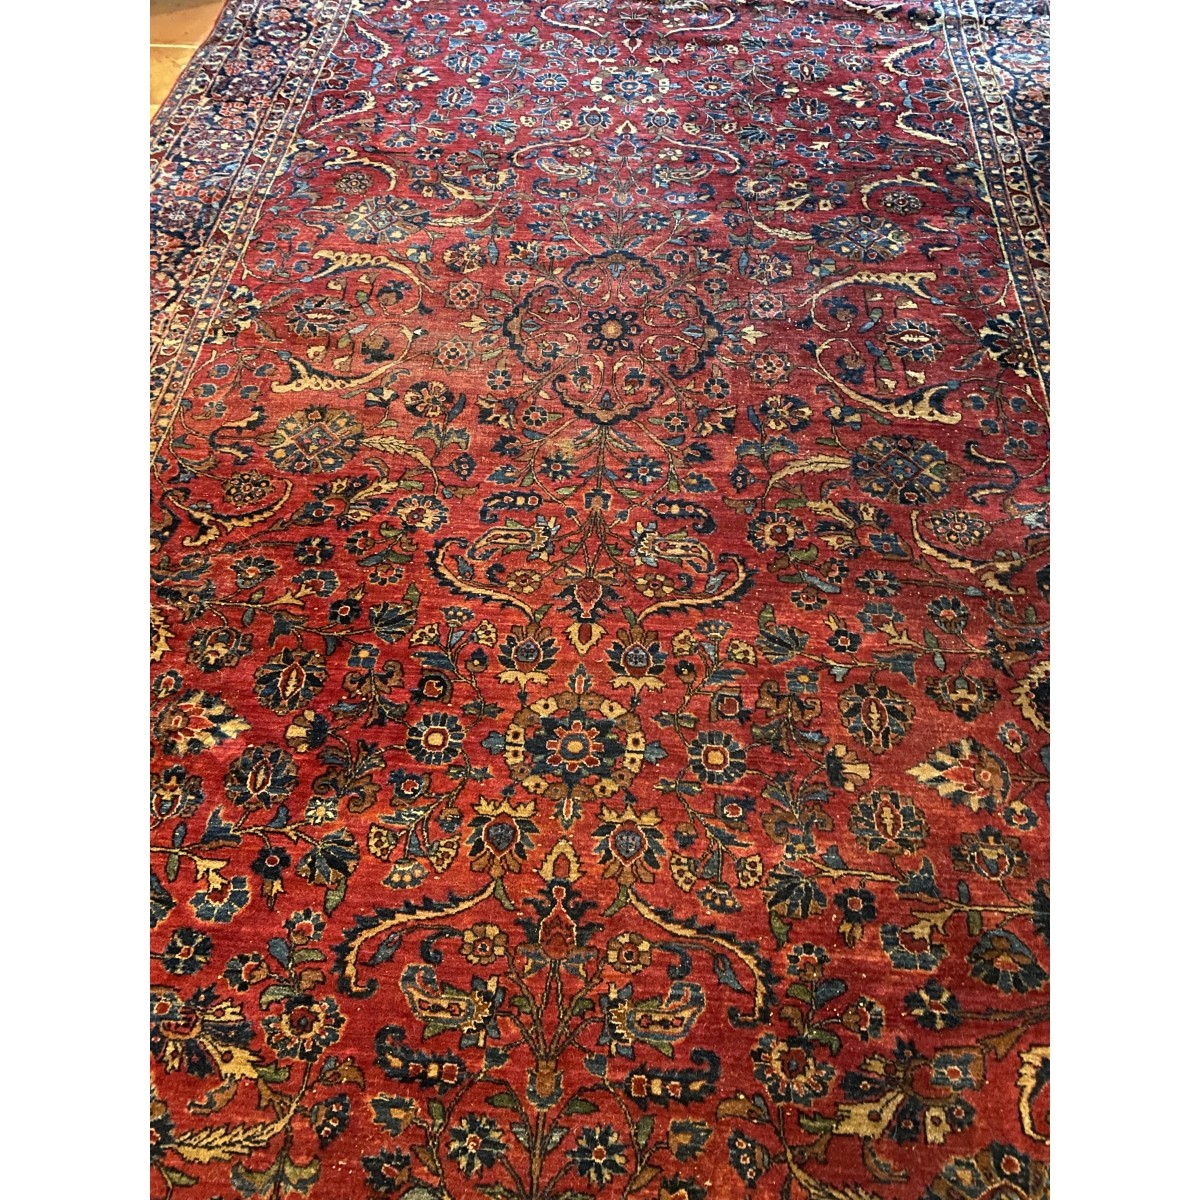 Large Mid 20th C. Persian Rug